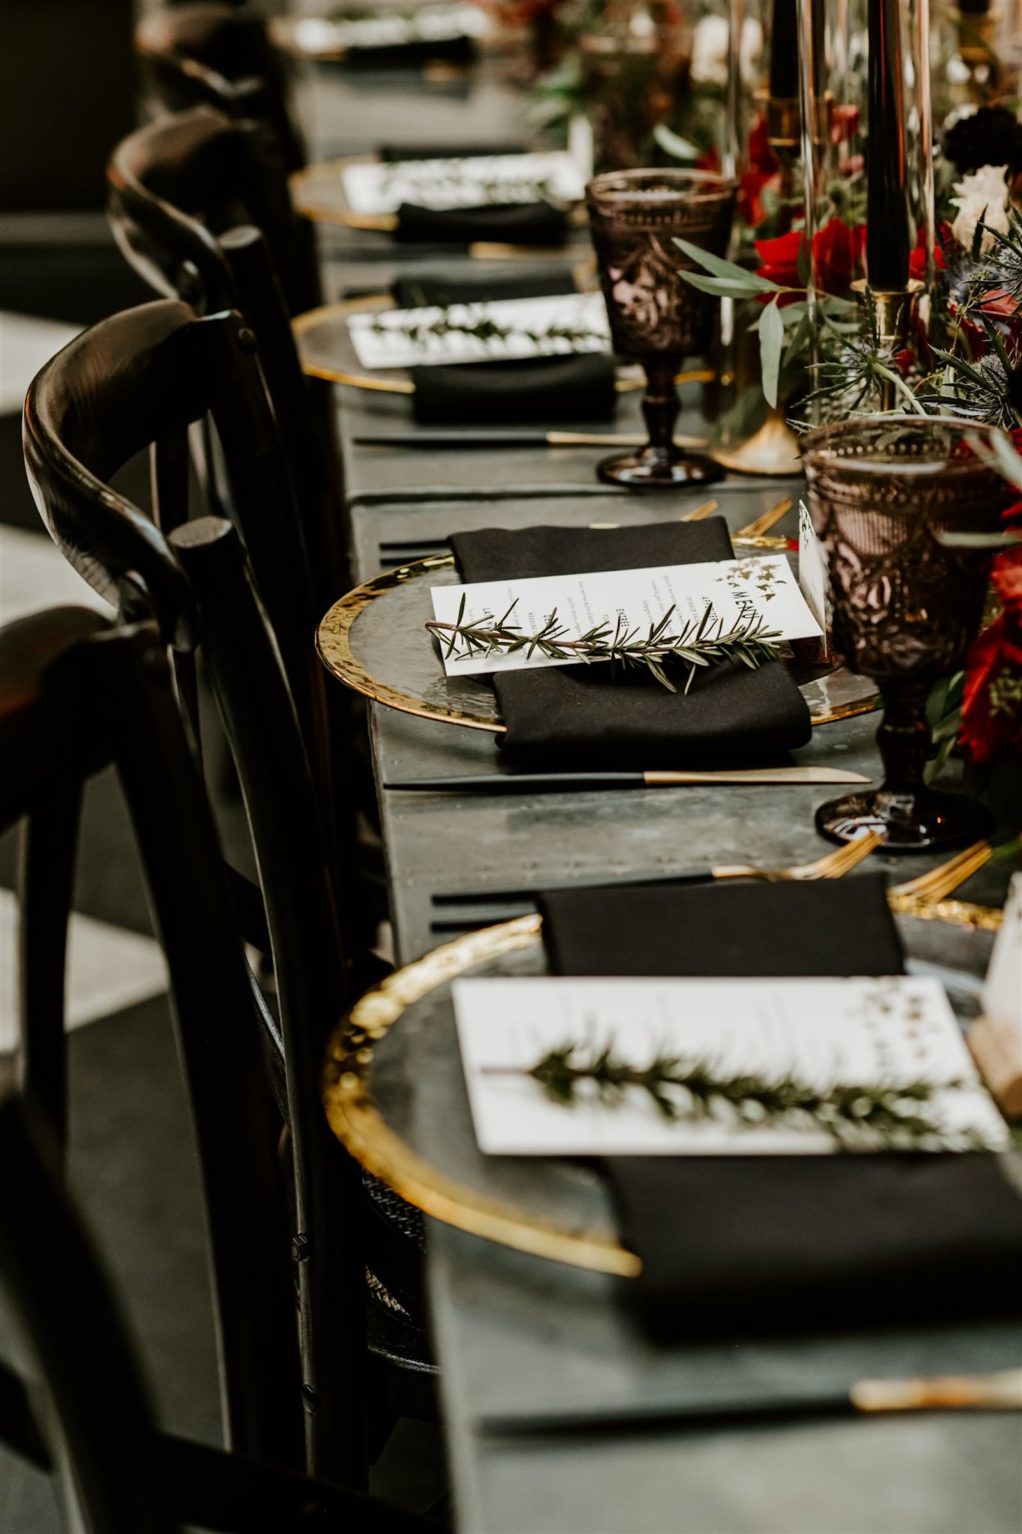 Long Communal Banquet Feasting Table Wedding Place Settings with Gold Rim Glass Charger Plates, Black and Gold Flatware, Black Napkins, Menu Cards, and Sprig of Rosemary | Vintage Beaded Goblet Water Wine Glassware by Kate Ryan Event Rentals | Winsor Event Studio